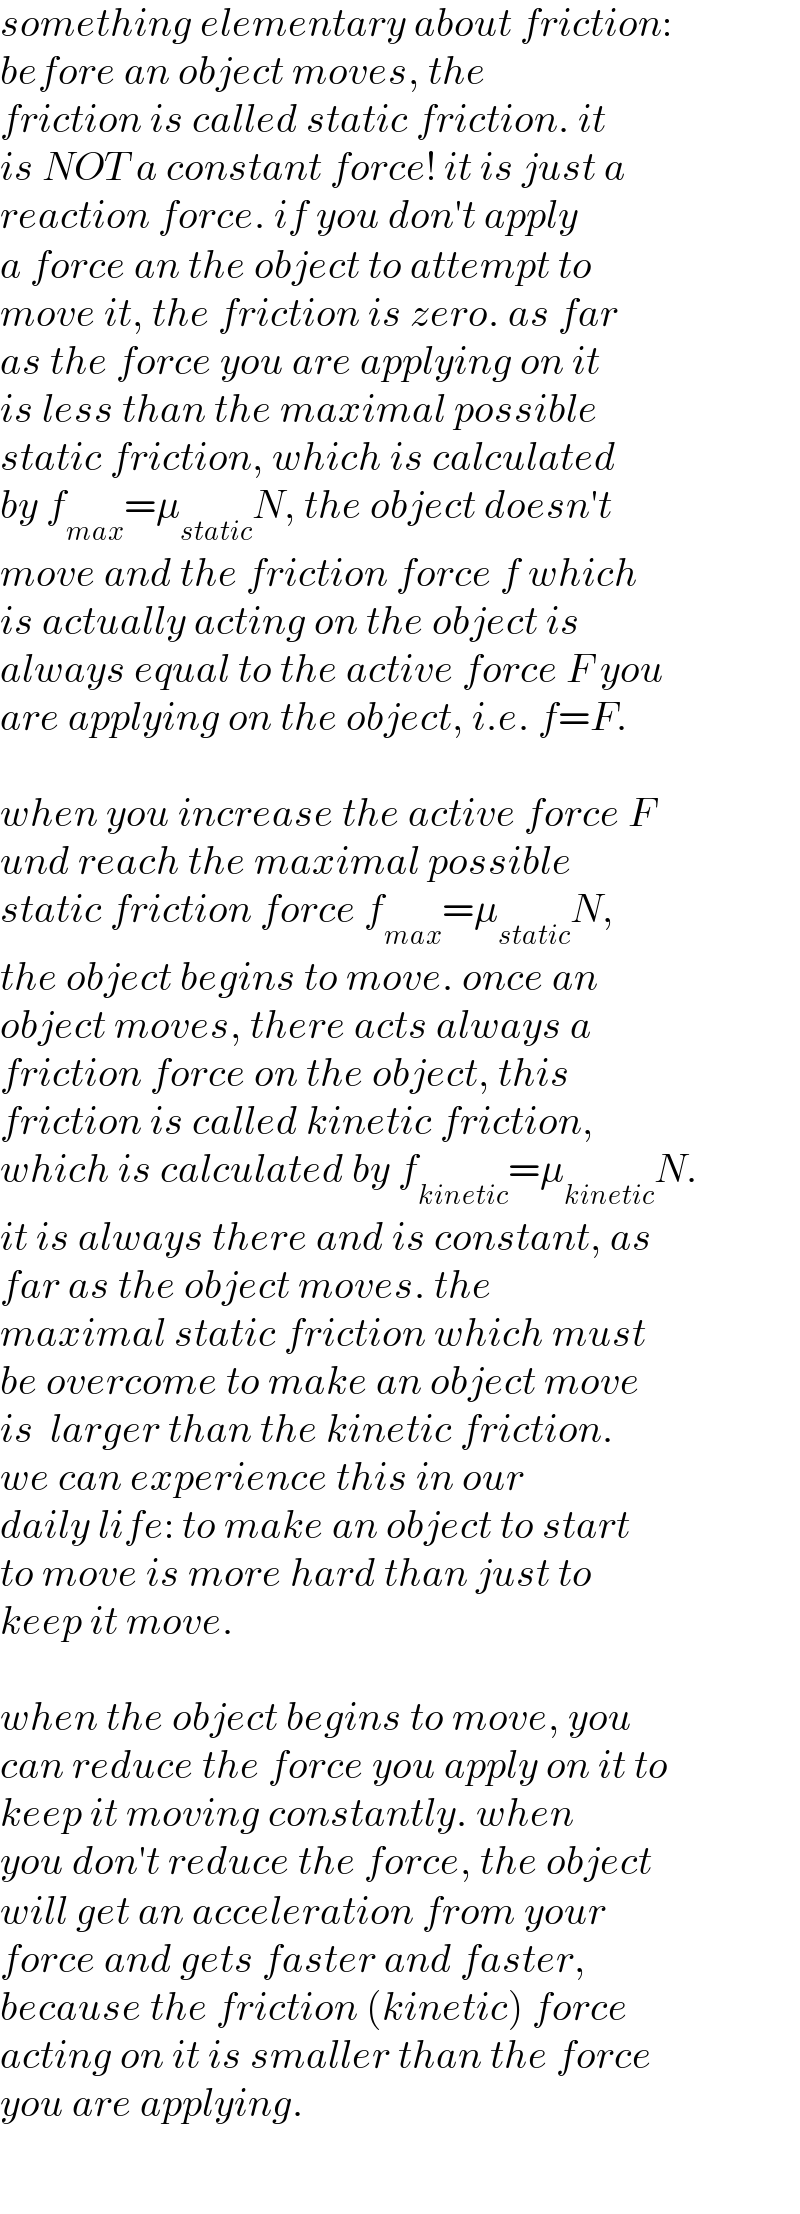 something elementary about friction:  before an object moves, the  friction is called static friction. it  is NOT a constant force! it is just a  reaction force. if you don′t apply  a force an the object to attempt to  move it, the friction is zero. as far  as the force you are applying on it  is less than the maximal possible  static friction, which is calculated  by f_(max) =μ_(static) N, the object doesn′t  move and the friction force f which  is actually acting on the object is   always equal to the active force F you  are applying on the object, i.e. f=F.    when you increase the active force F  und reach the maximal possible  static friction force f_(max) =μ_(static) N,  the object begins to move. once an  object moves, there acts always a  friction force on the object, this  friction is called kinetic friction,  which is calculated by f_(kinetic) =μ_(kinetic) N.  it is always there and is constant, as  far as the object moves. the   maximal static friction which must  be overcome to make an object move  is  larger than the kinetic friction.   we can experience this in our  daily life: to make an object to start  to move is more hard than just to  keep it move.    when the object begins to move, you  can reduce the force you apply on it to  keep it moving constantly. when  you don′t reduce the force, the object  will get an acceleration from your  force and gets faster and faster,  because the friction (kinetic) force  acting on it is smaller than the force  you are applying.  